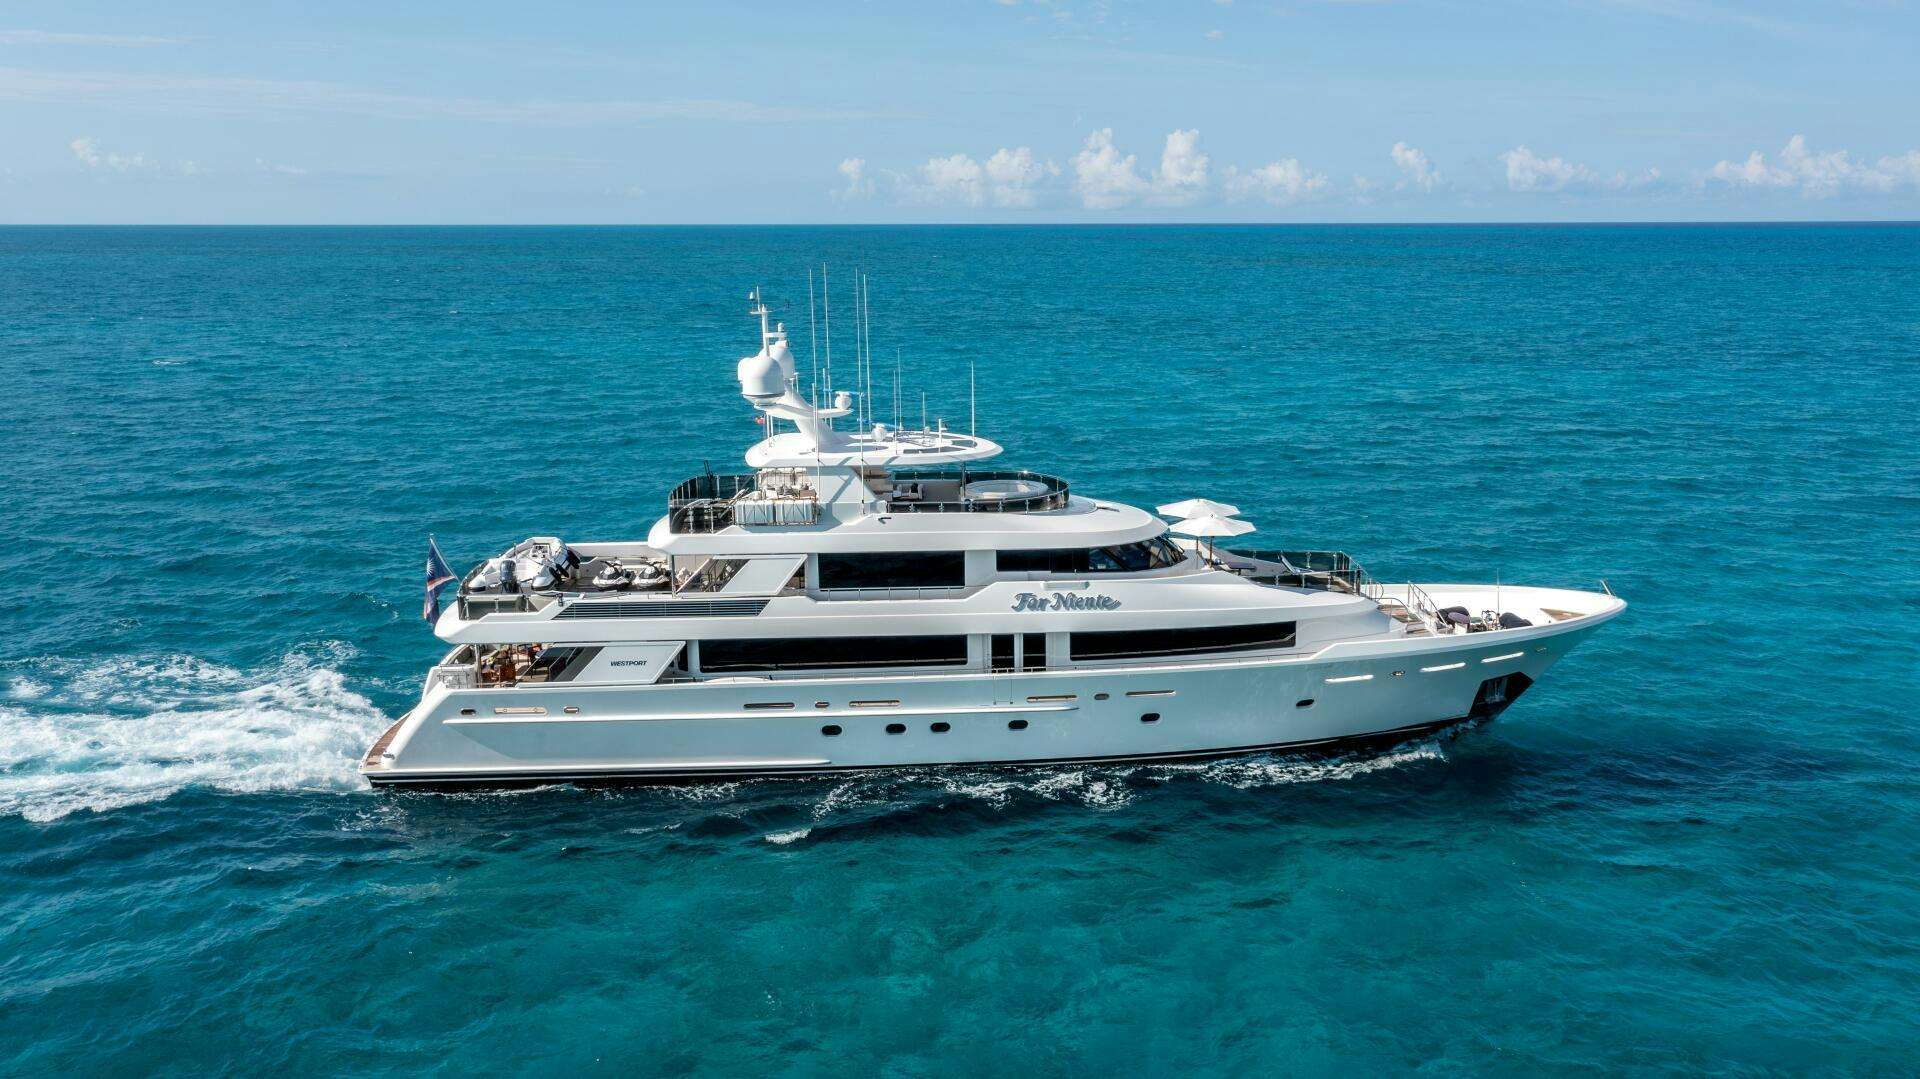 Watch Video for FAR NIENTE Yacht for Sale